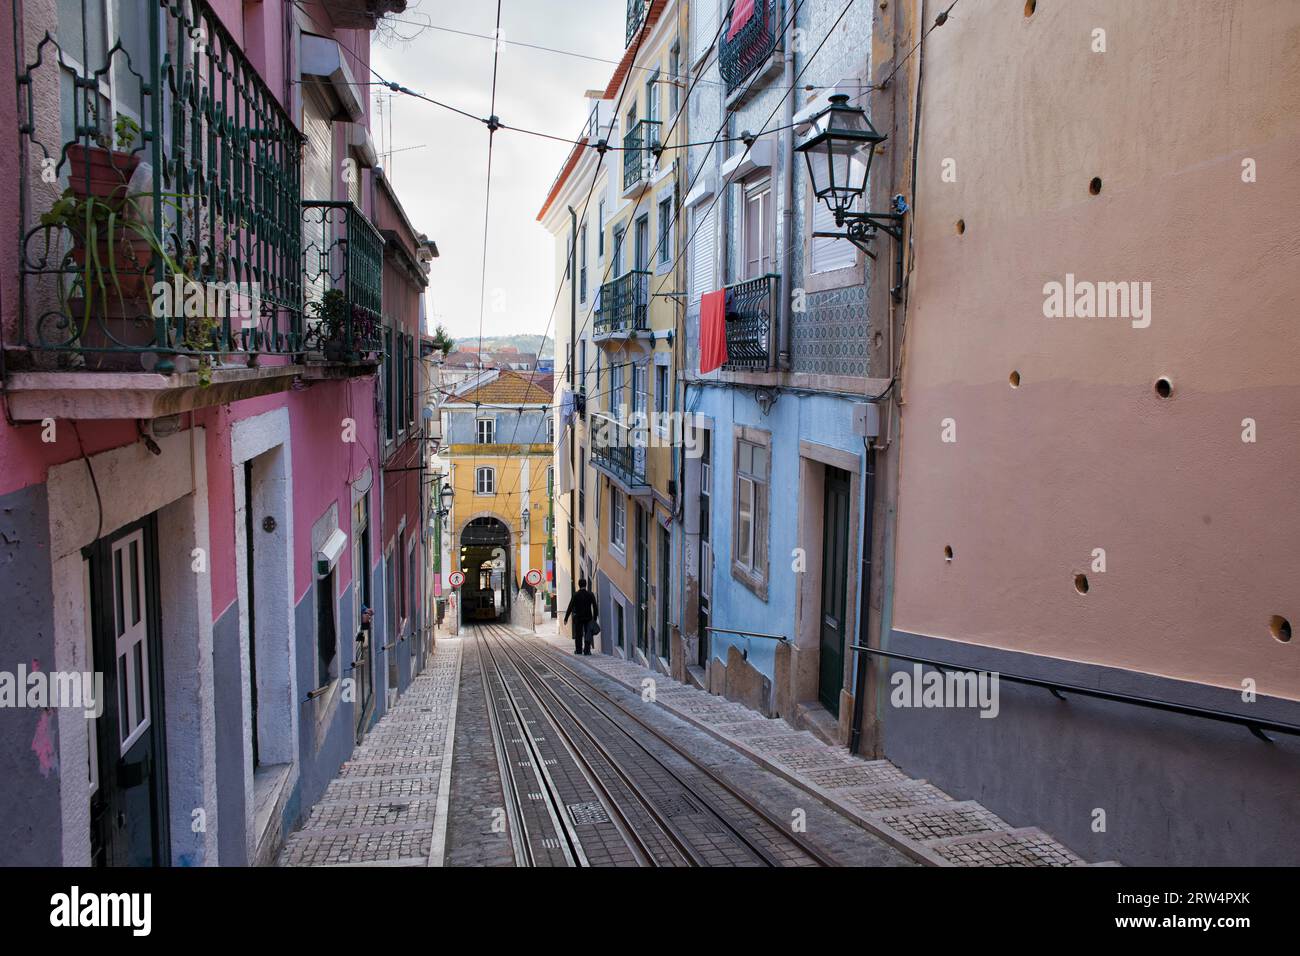 Bica funicular in the city of Lisbon, Portugal Stock Photo